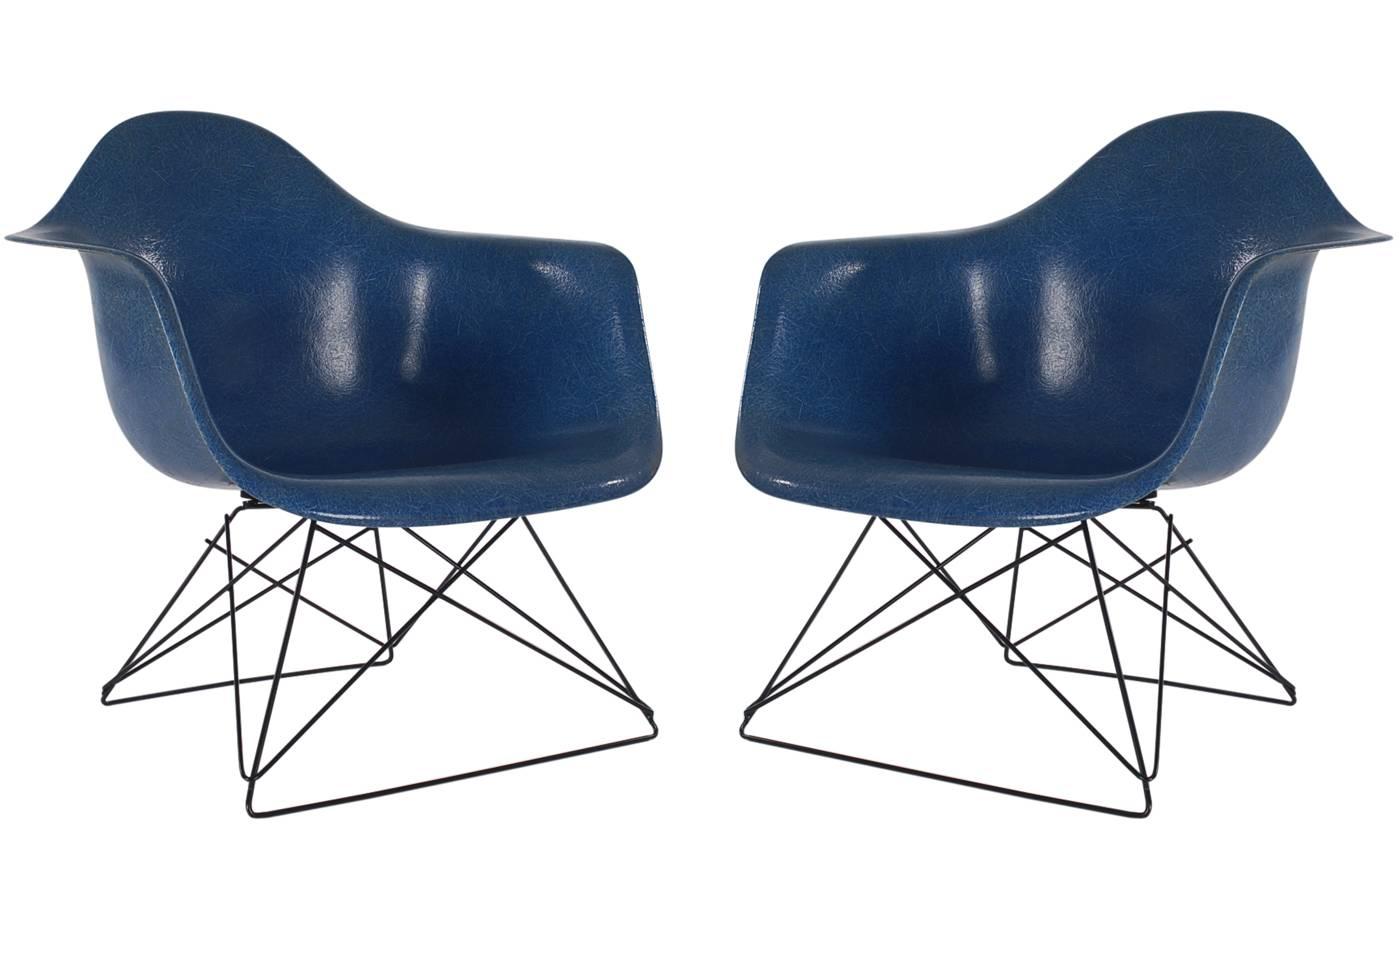 Here we have an iconic design classic from the Mid-Century Modern period. This vintage fiberglass shell chair was designed by Charles Eames and produced by Herman Miller, circa 1972. In a very uncommon royal blue color. The chair seats are vintage,